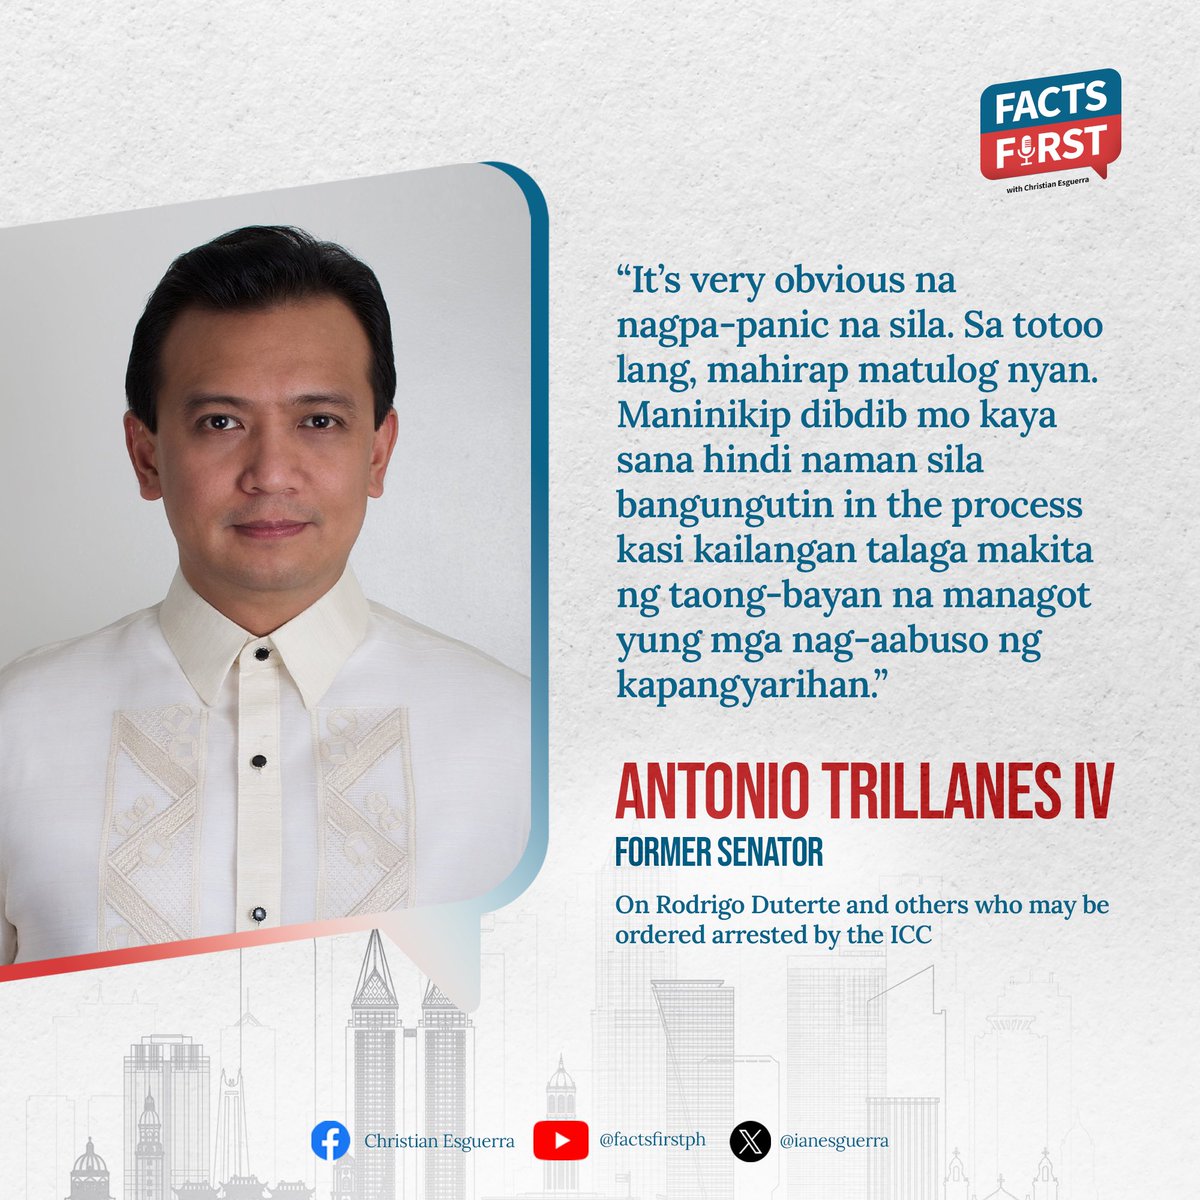 “It’s very obvious na nagpa-panic na sila.” - @TrillanesSonny on Duterte and others who may be ordered arrested by the ICC 

Watch our #factsfirst #recap here: youtube.com/live/NKRAXrOk6…